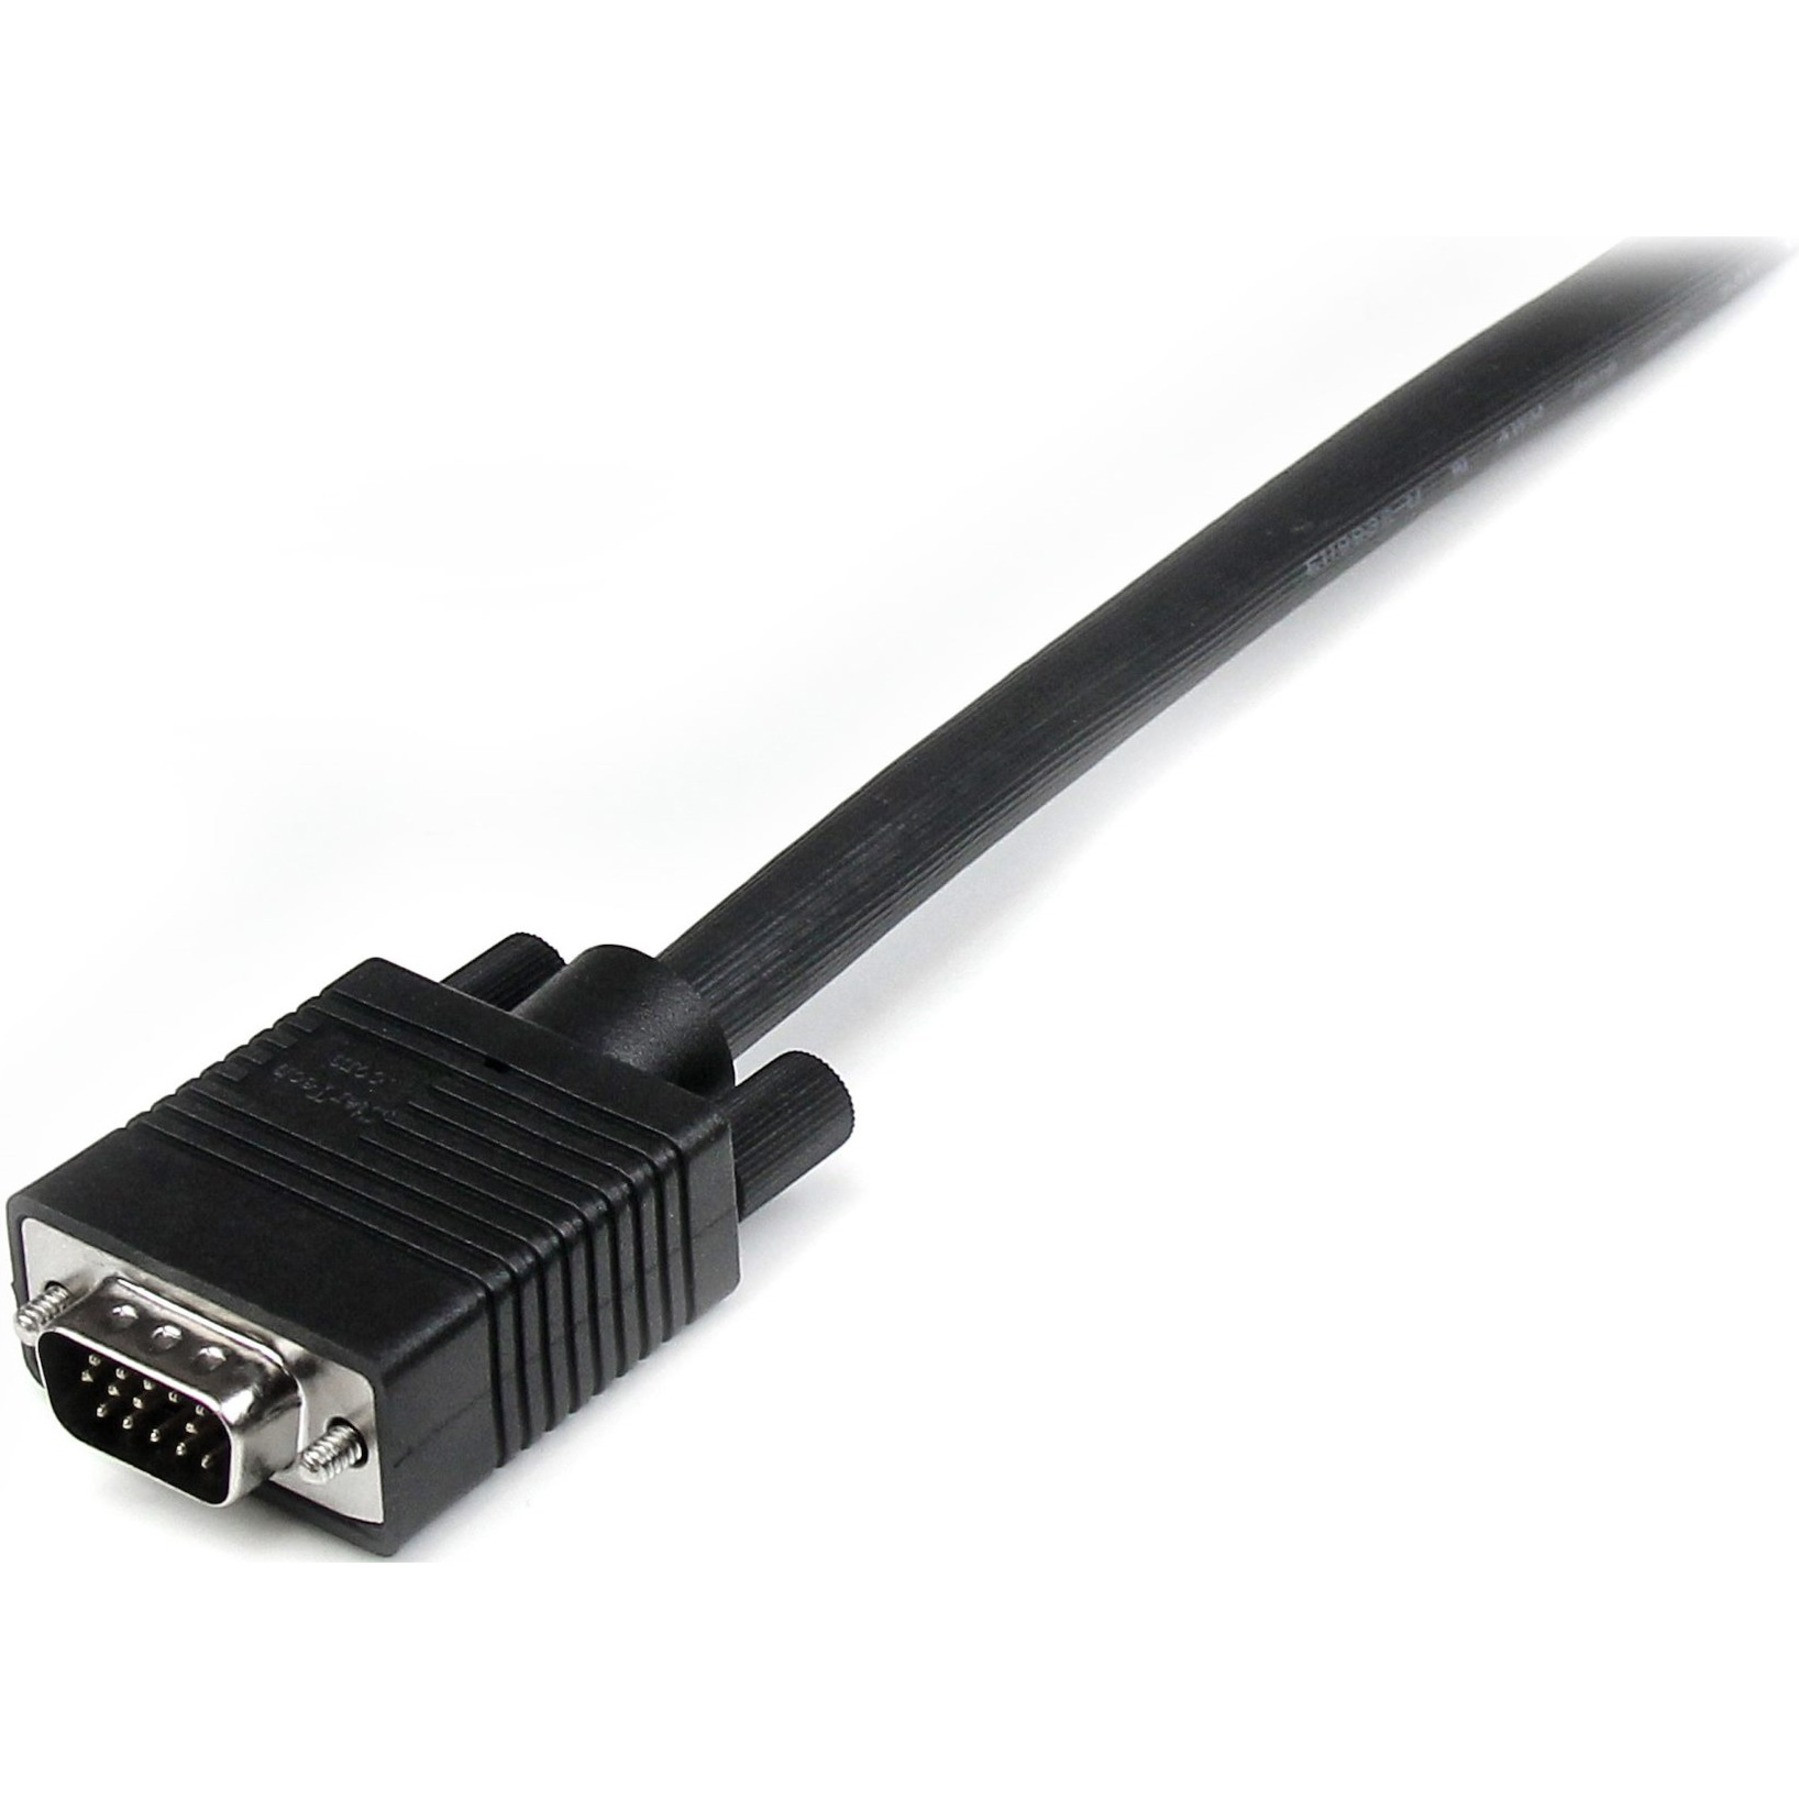 Startech .com 45 ft Coax High Resolution VGA Monitor CableHD15 M/MConnect your VGA monitor with the highest quality connection availab… MXT101MMHQ45